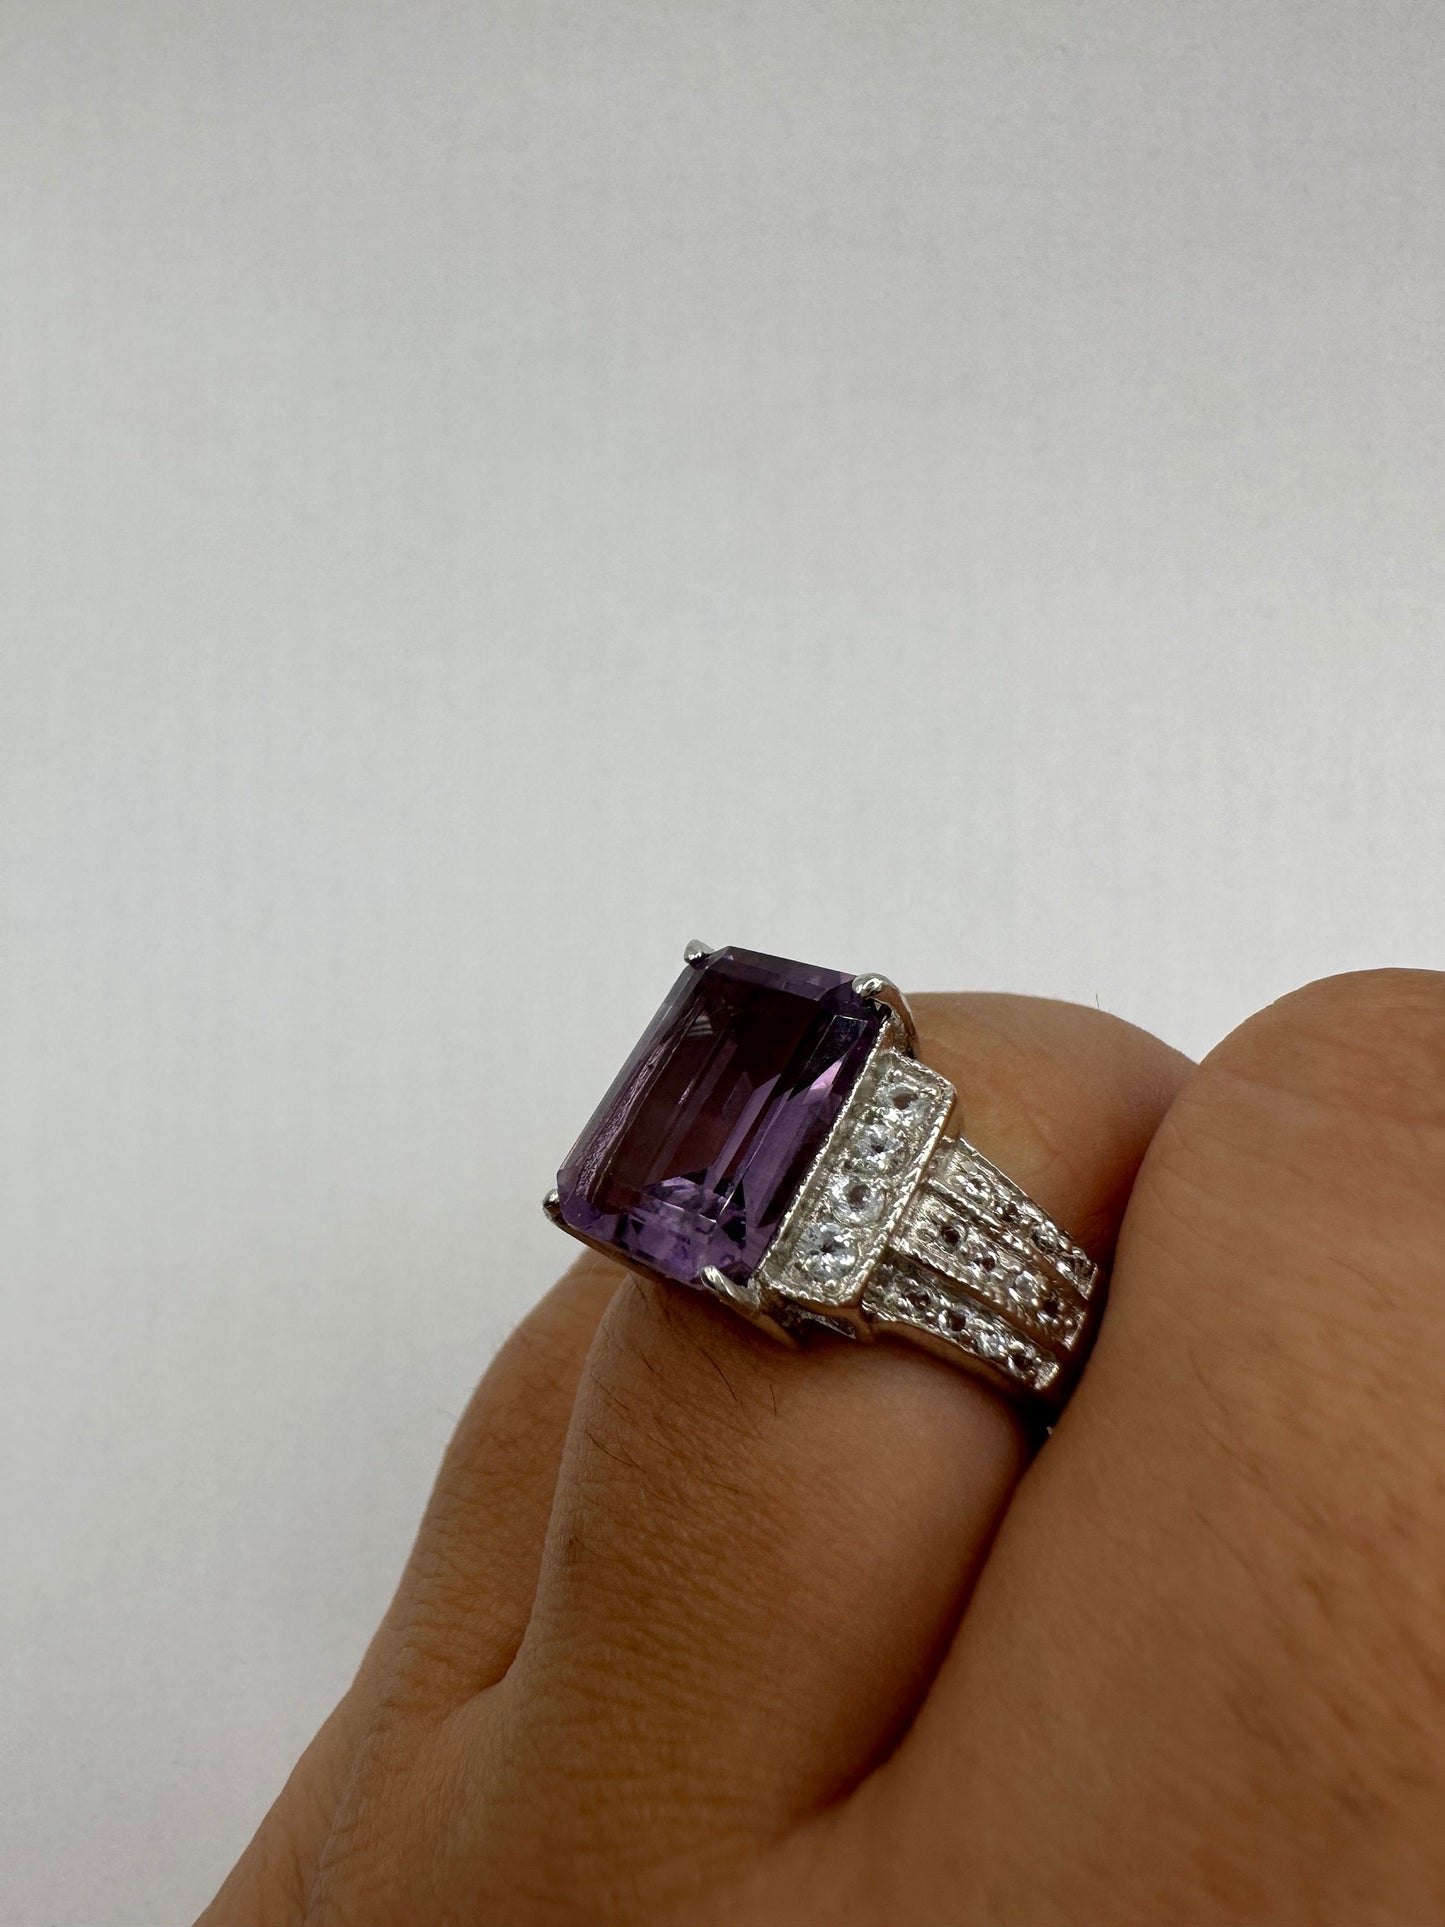 Vintage Purple Amethyst Ring 925 Sterling Silver Deco Size 7